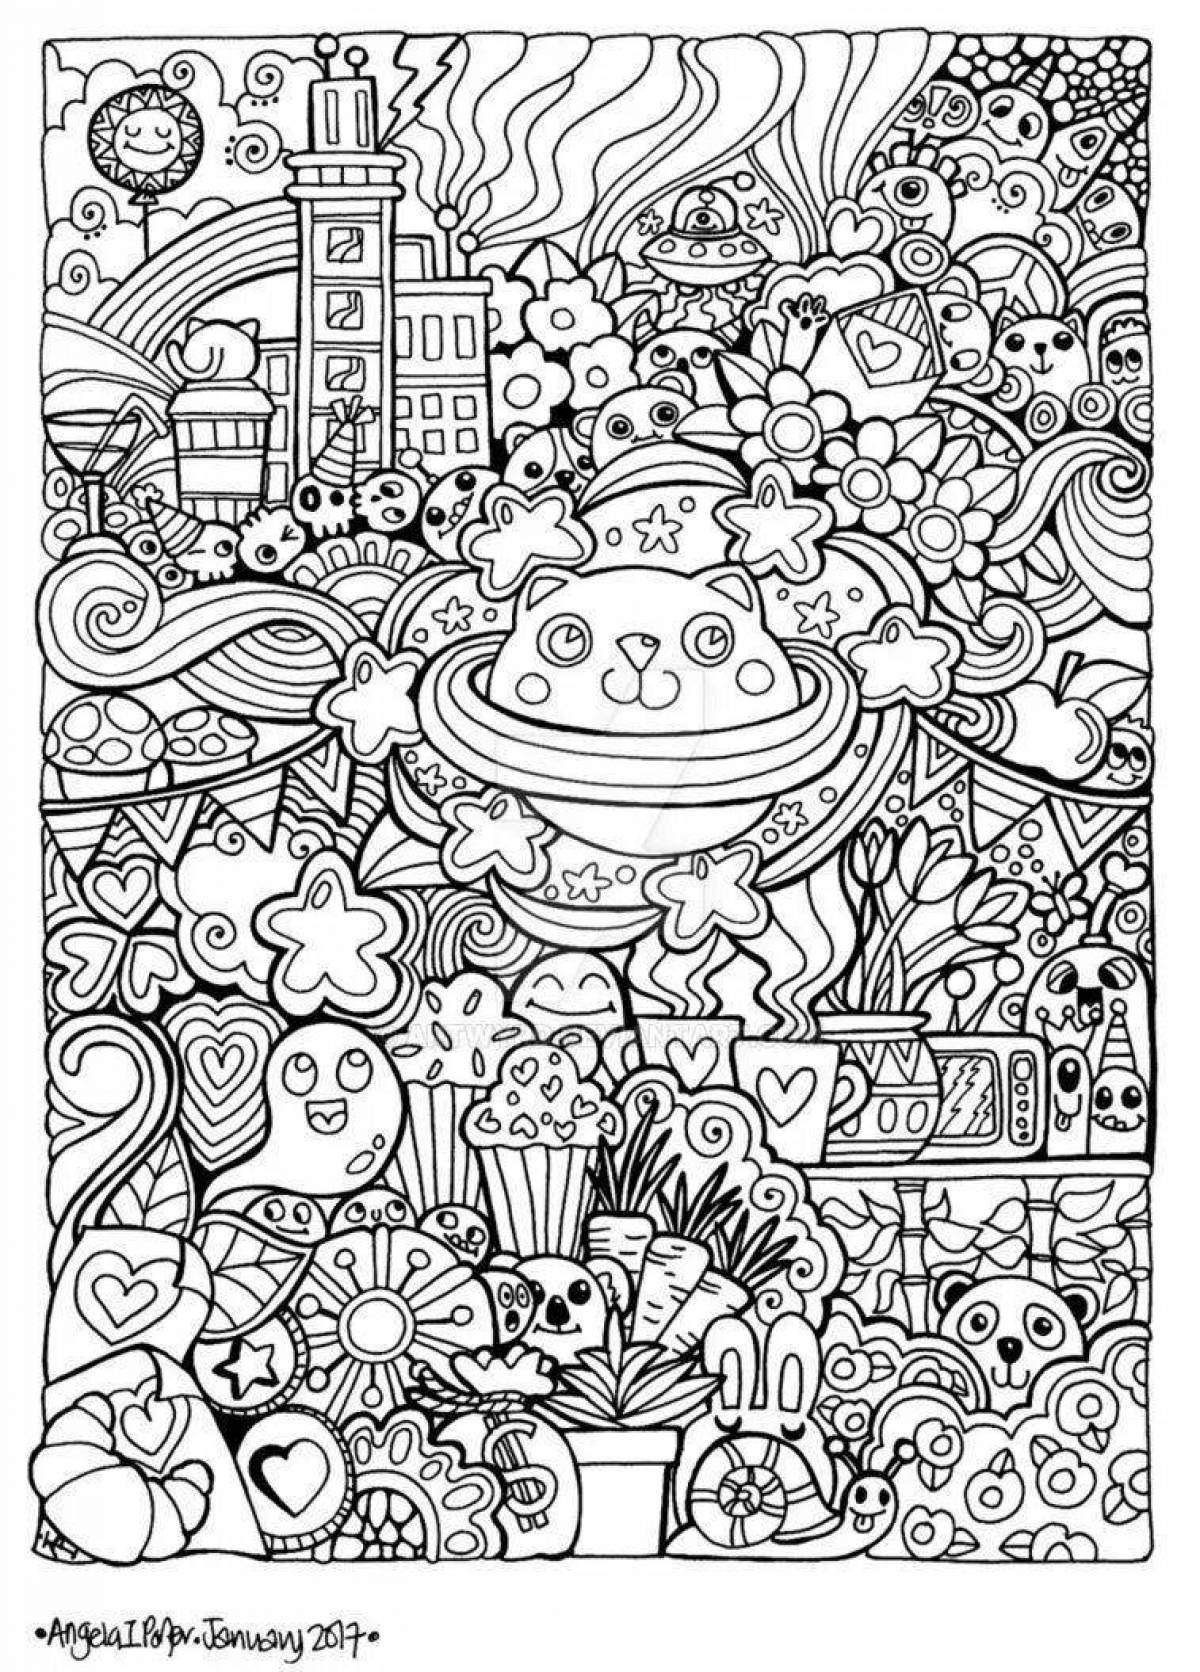 Bright coloring page elements